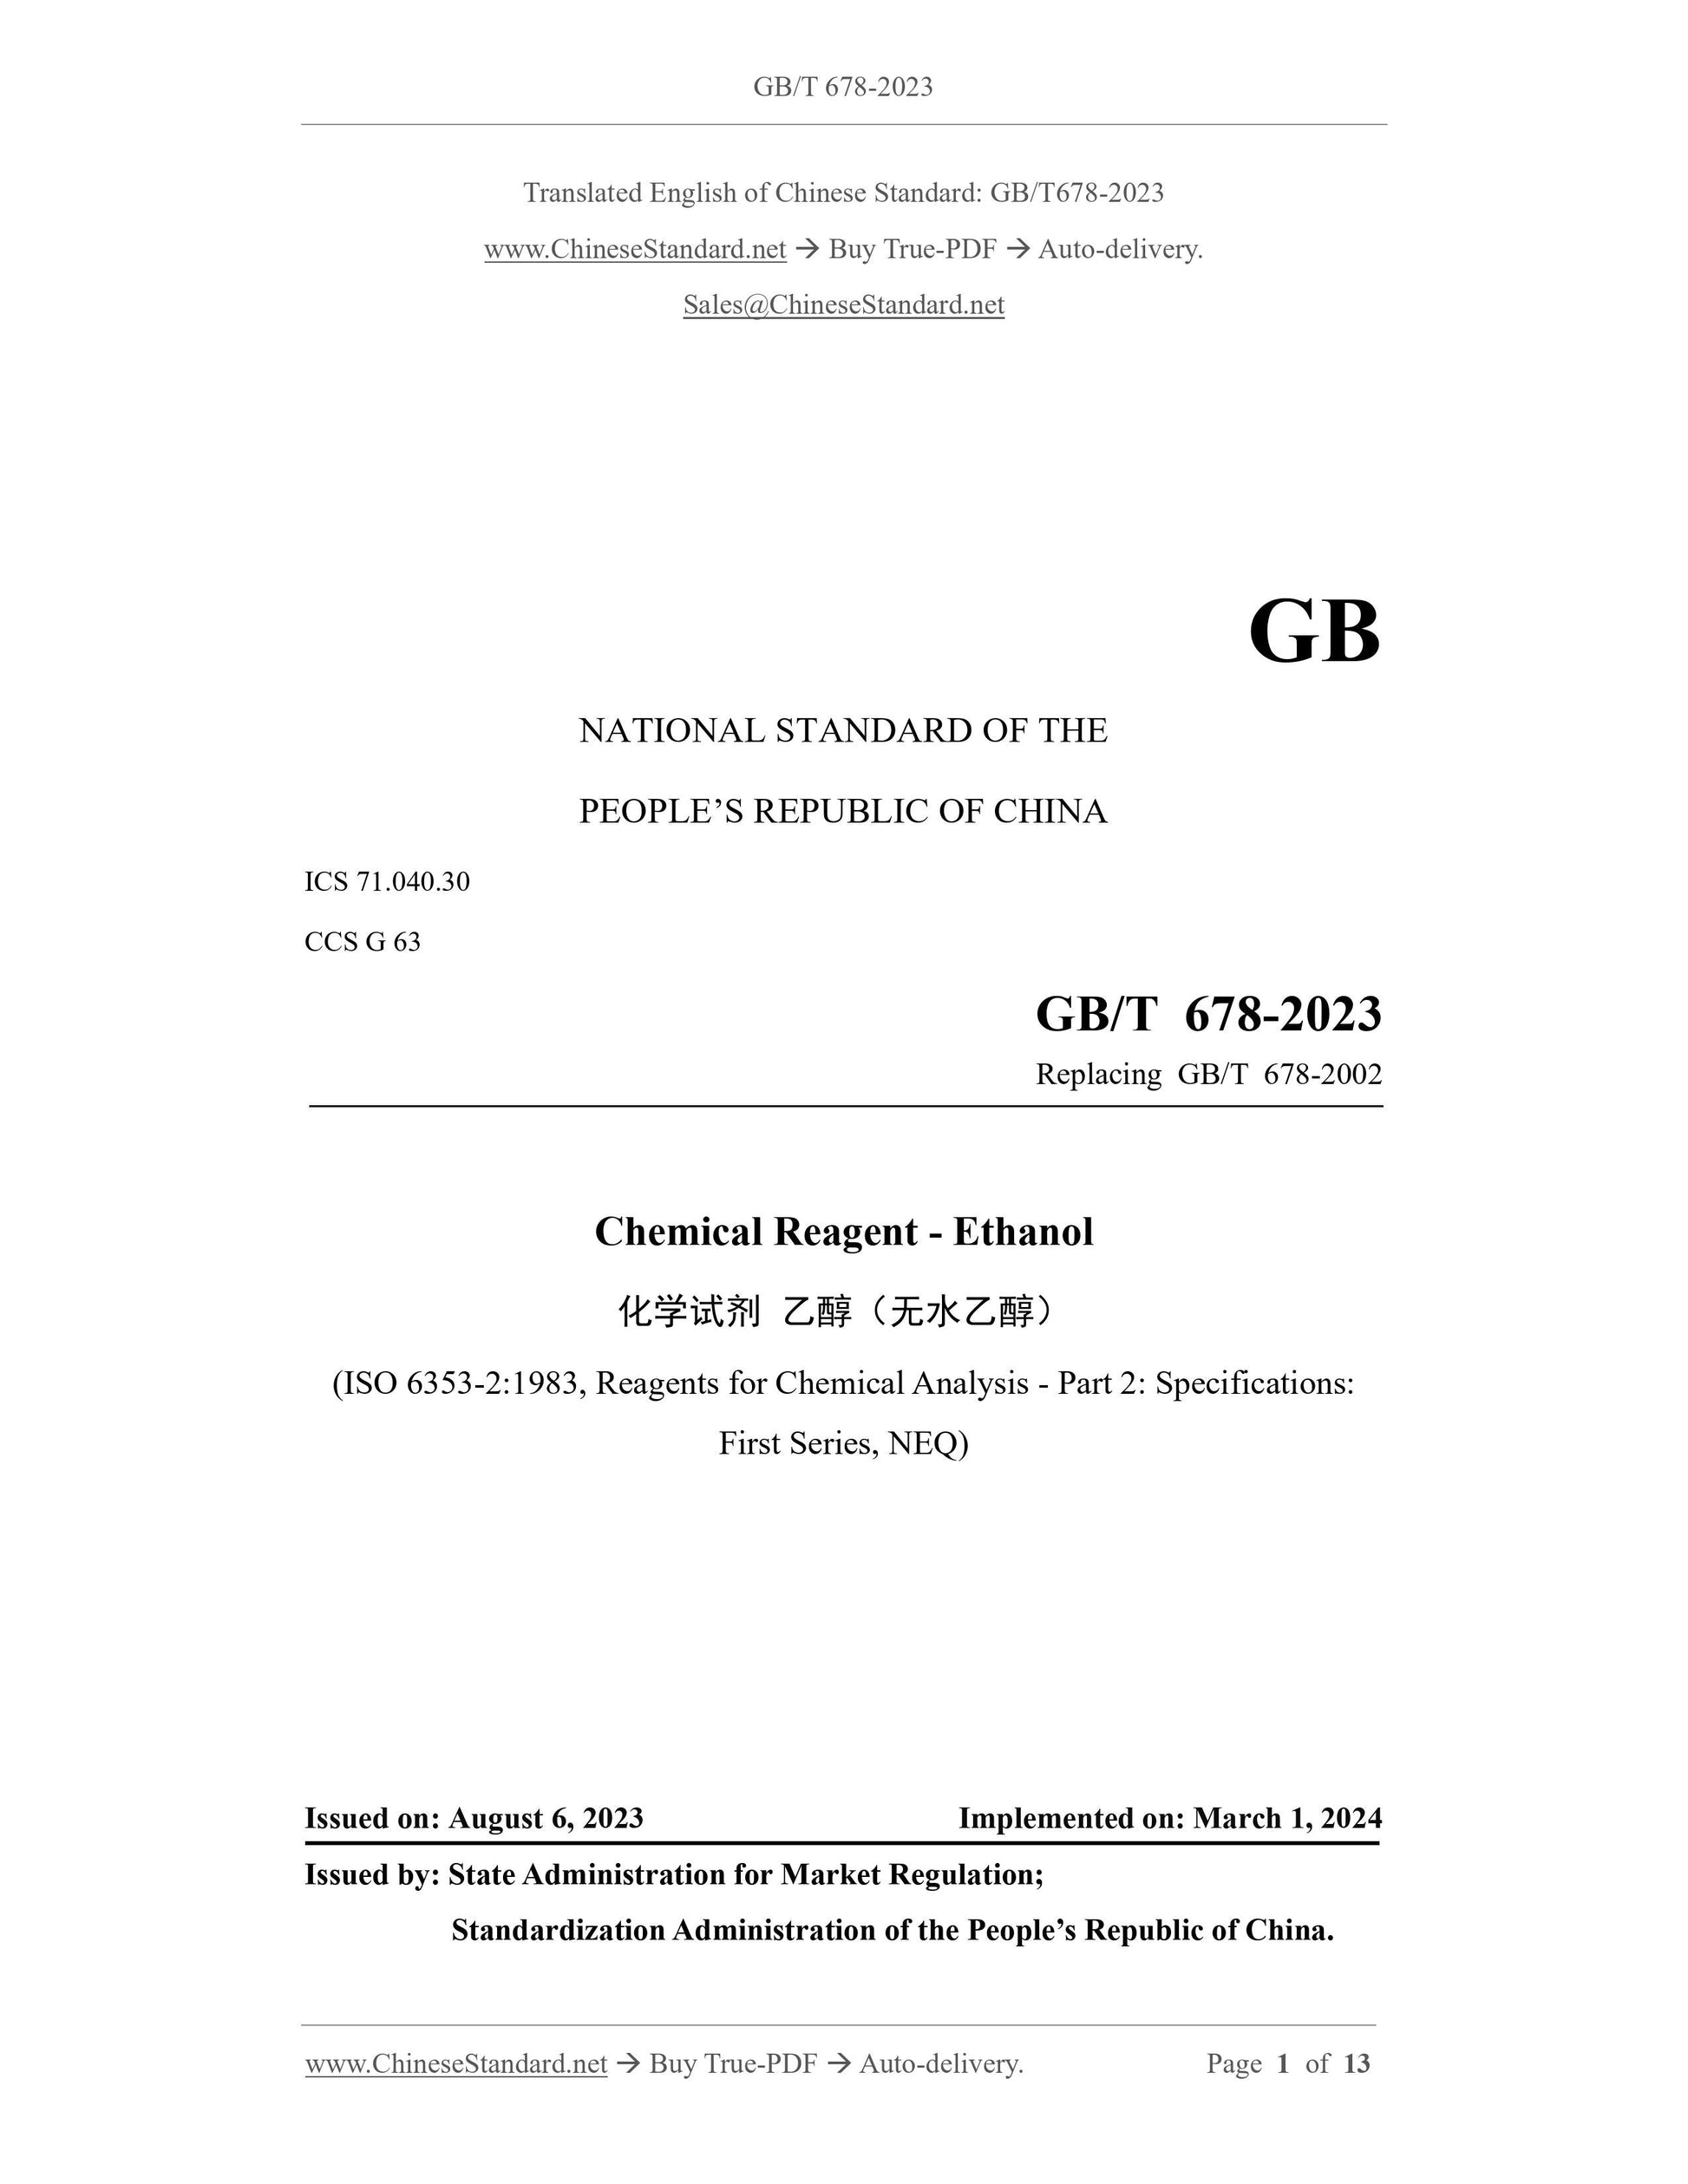 GB/T 678-2023 Page 1